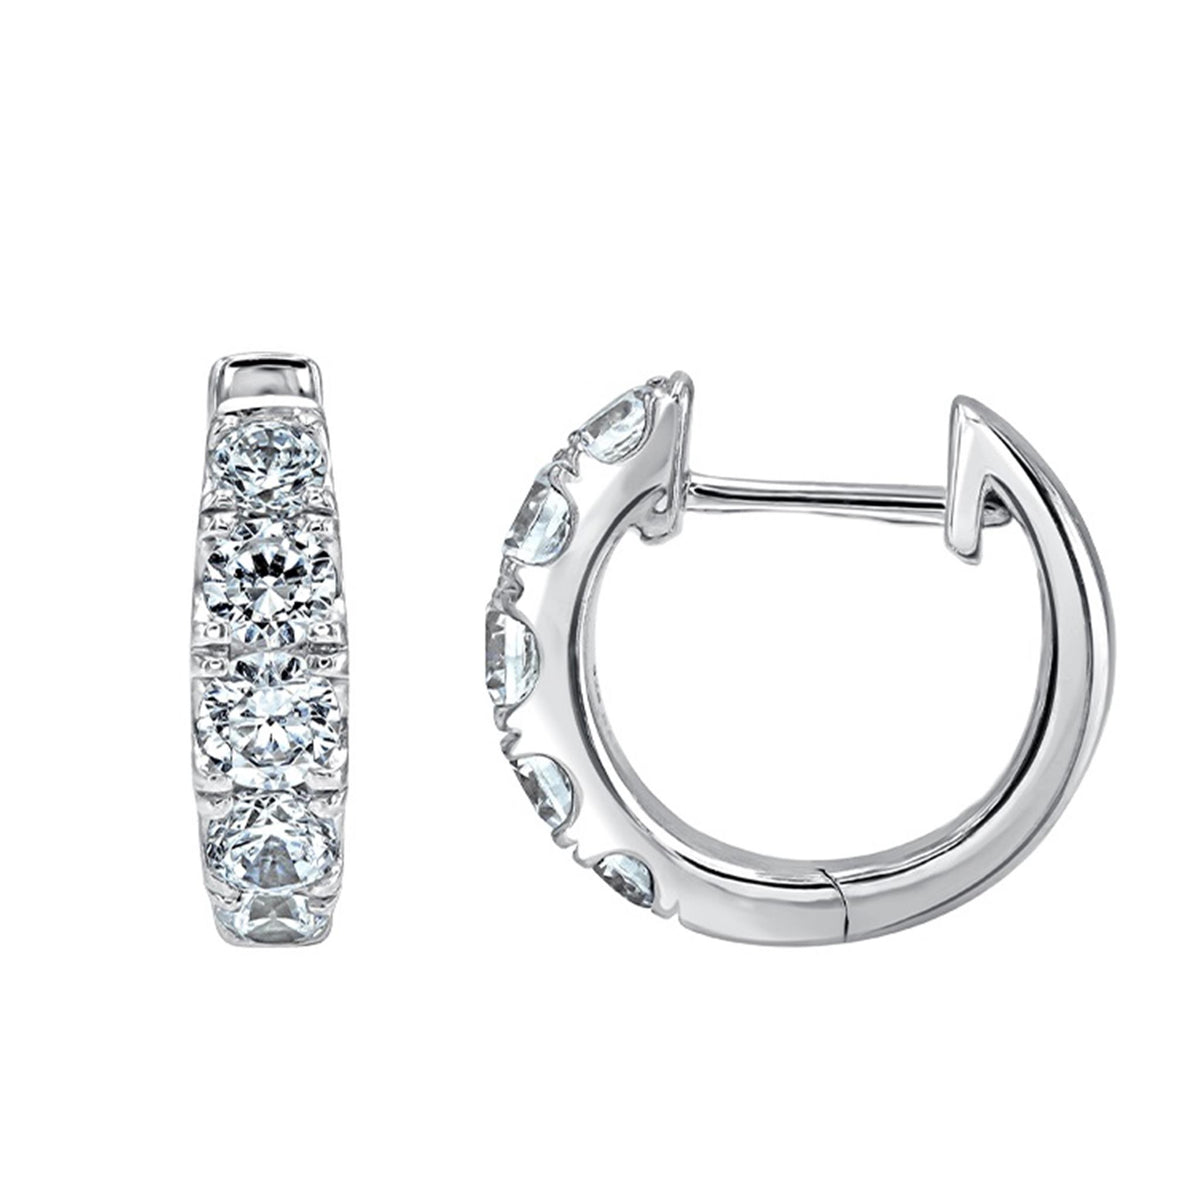 Fire & Ice 18Kt White Gold Azalea Hoop Earrings With .92cttw Natural Diamonds